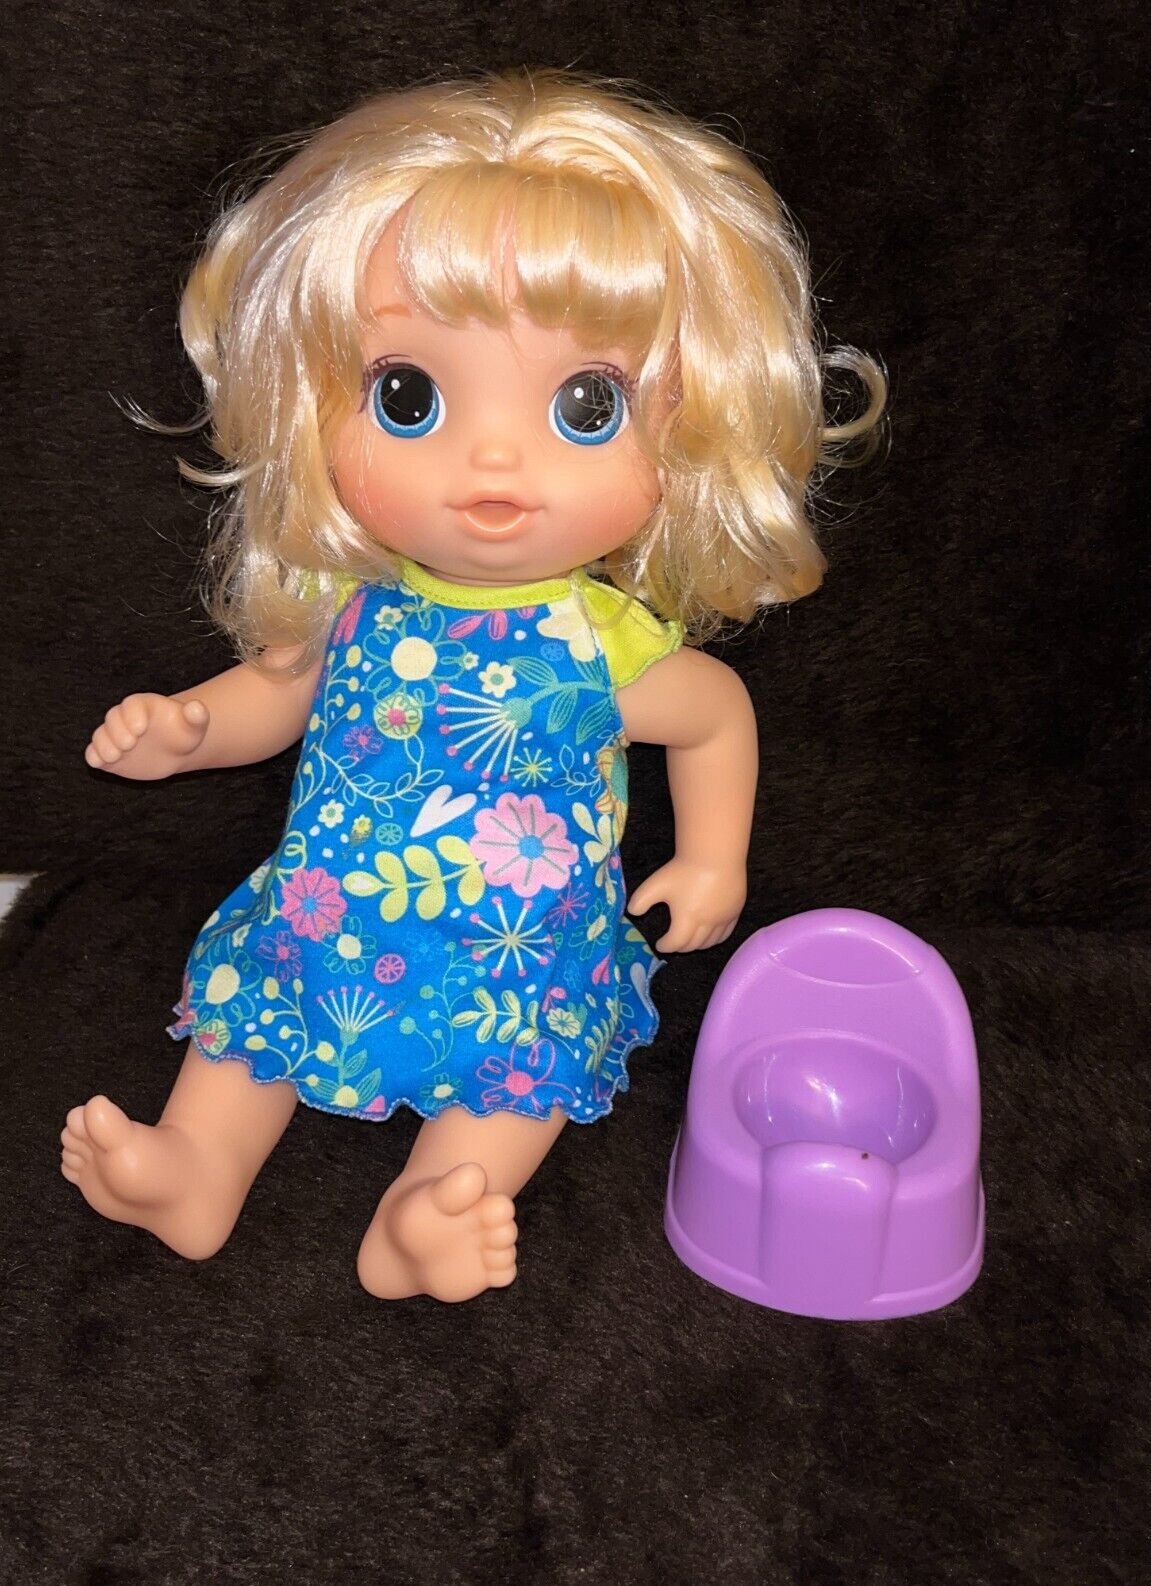 Baby Alive Potty Dance Hasbro Baby Doll 14 inch Tested Works Talking and Moving - $34.99